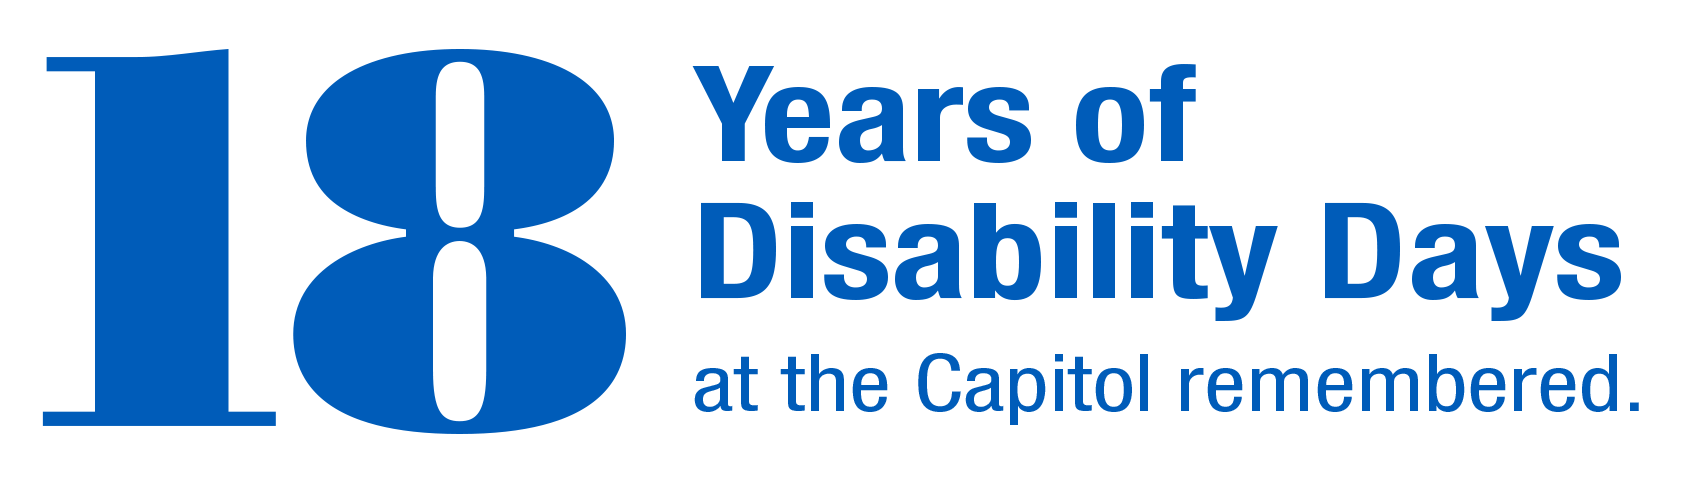 18 Years of Disability Days at the Capitol remembered.